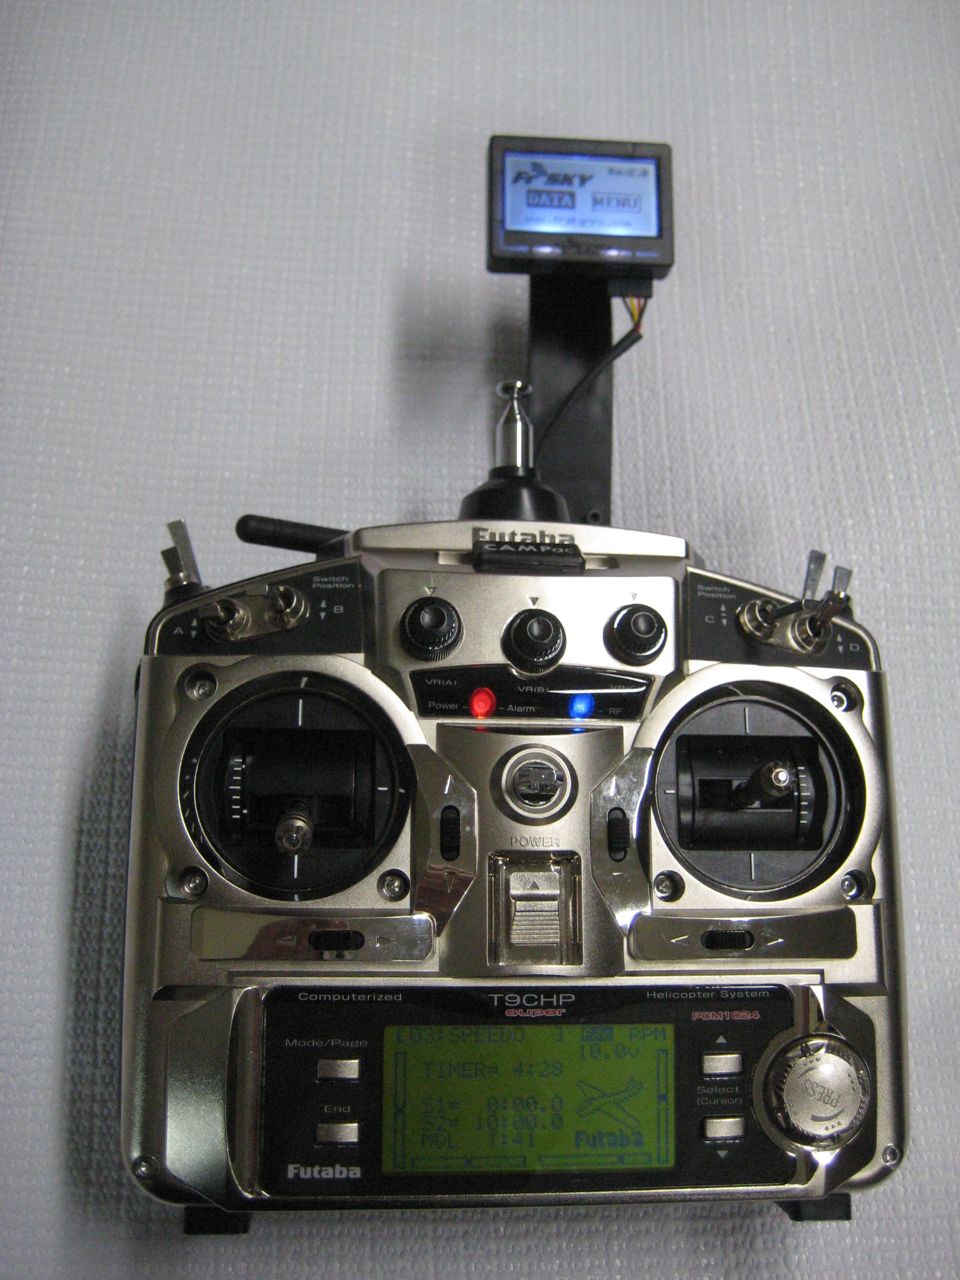 FrSky LCD Mounting Arm